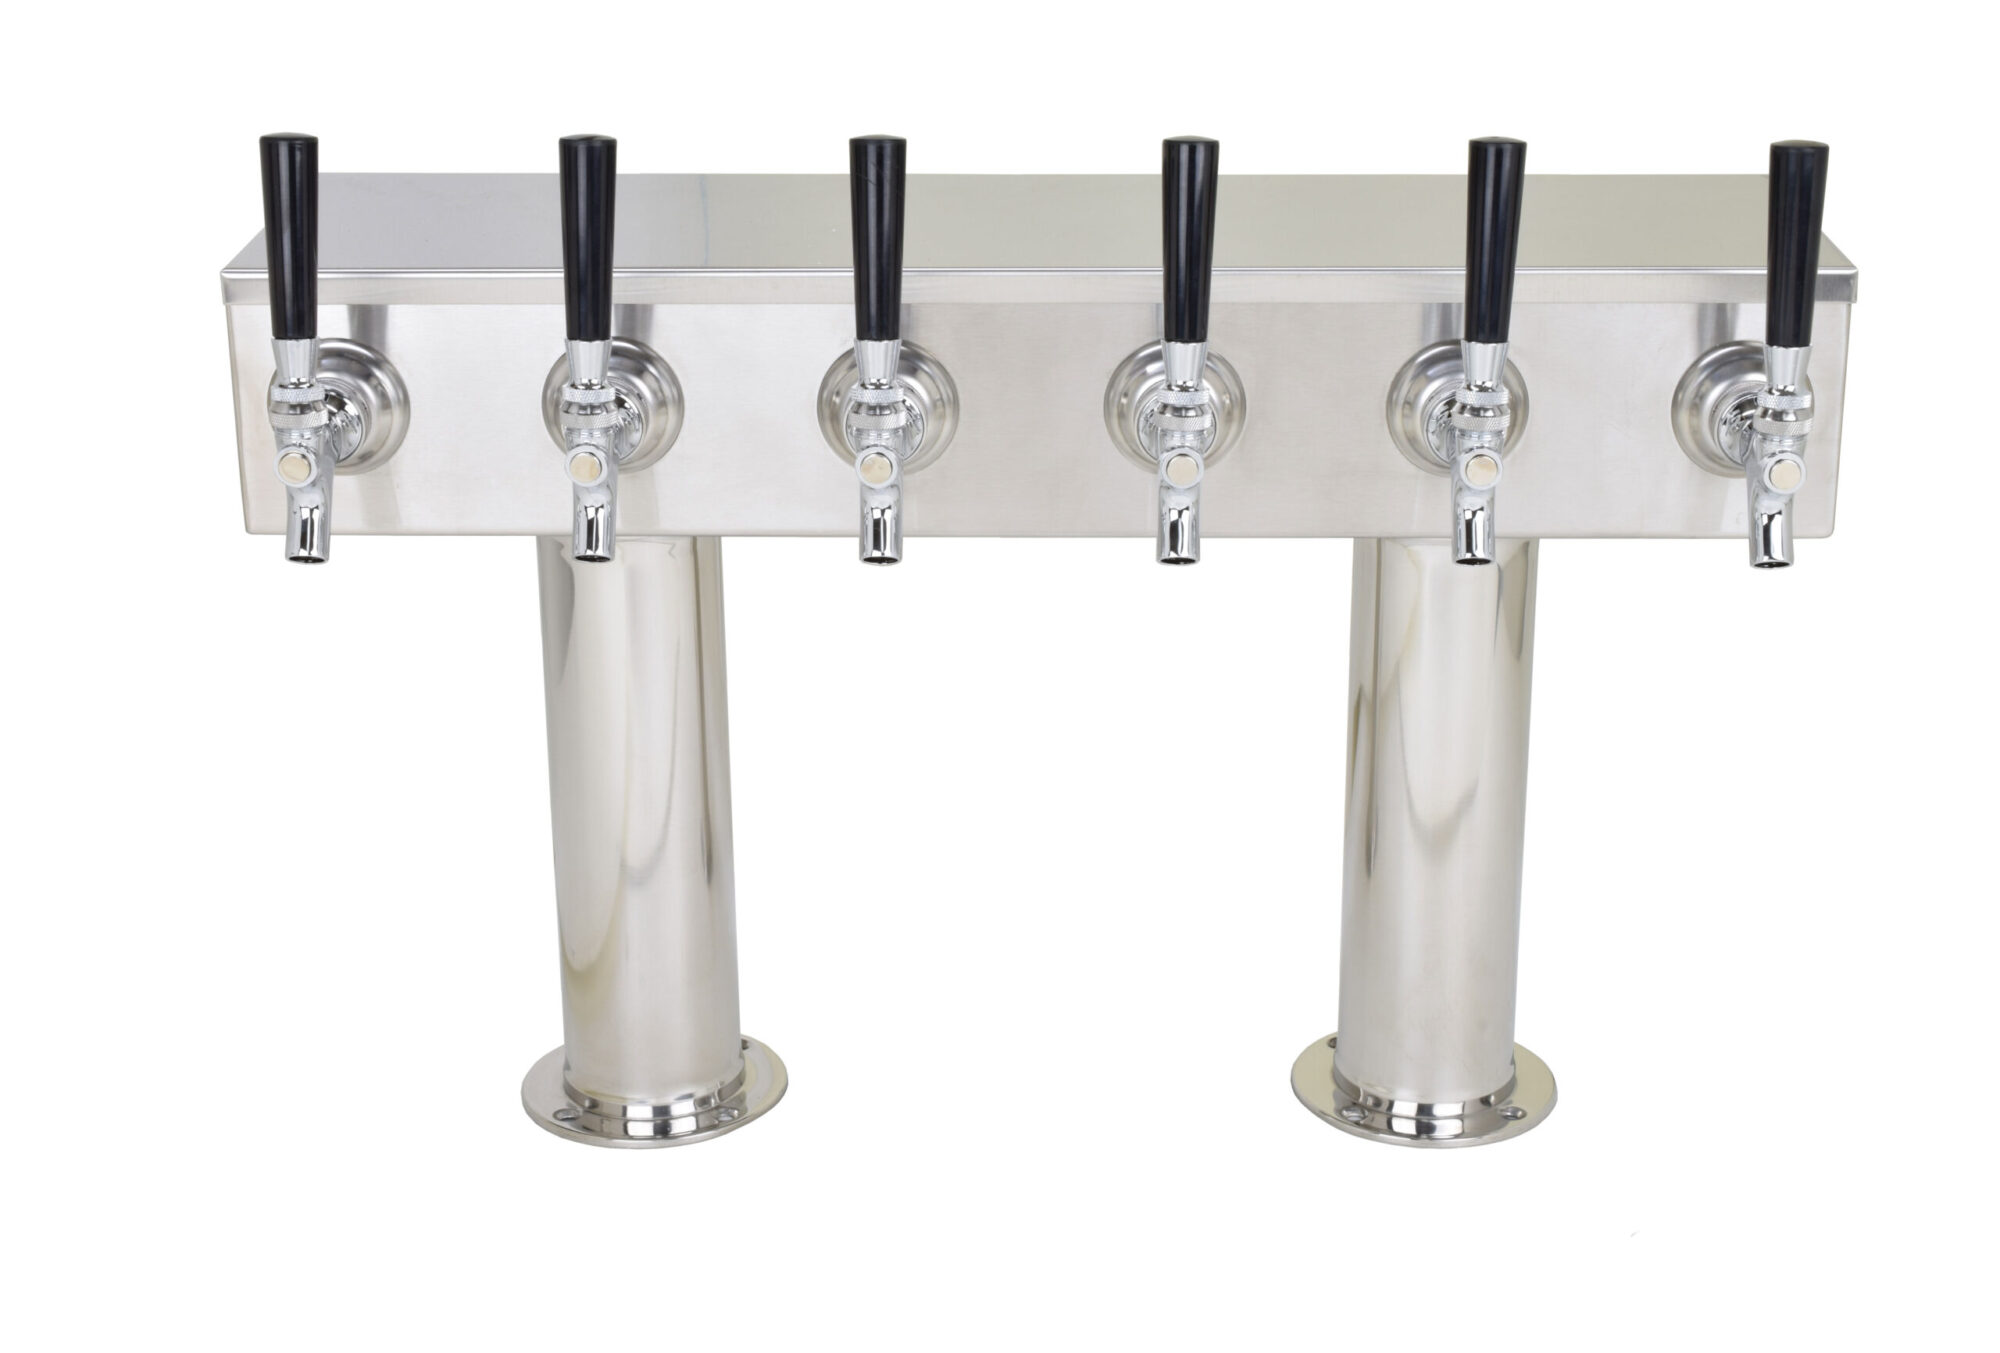 759R-6C Six Faucet Pass Through Tower with 3" Bases - NSF - Specify On Center Spacing